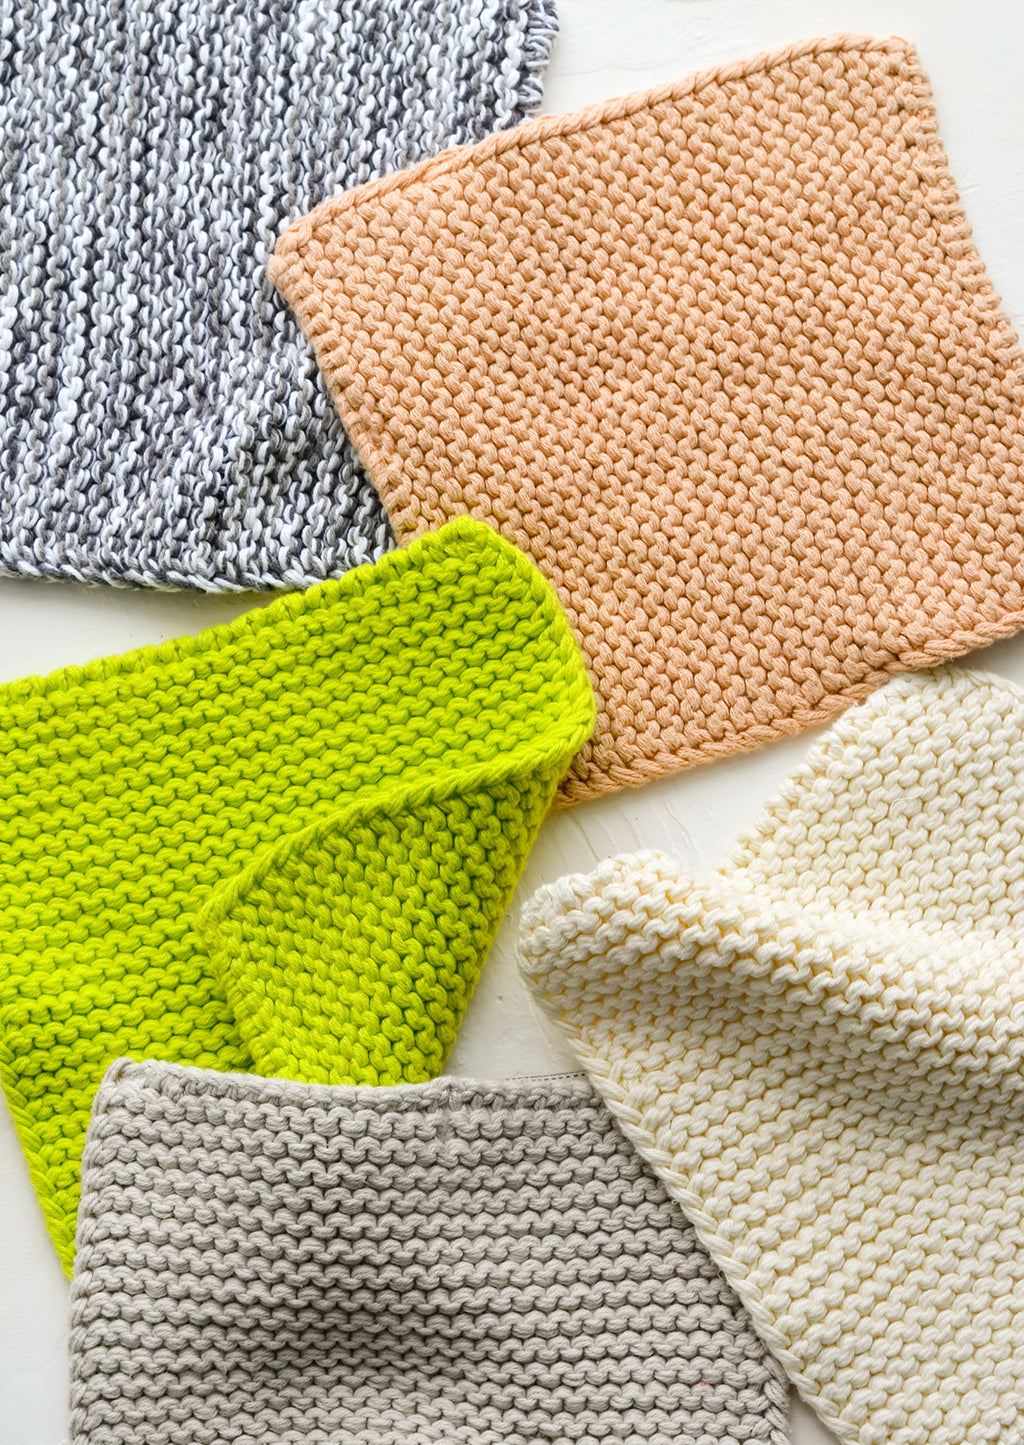 2: Chunky knit potholder squares in assorted colors.